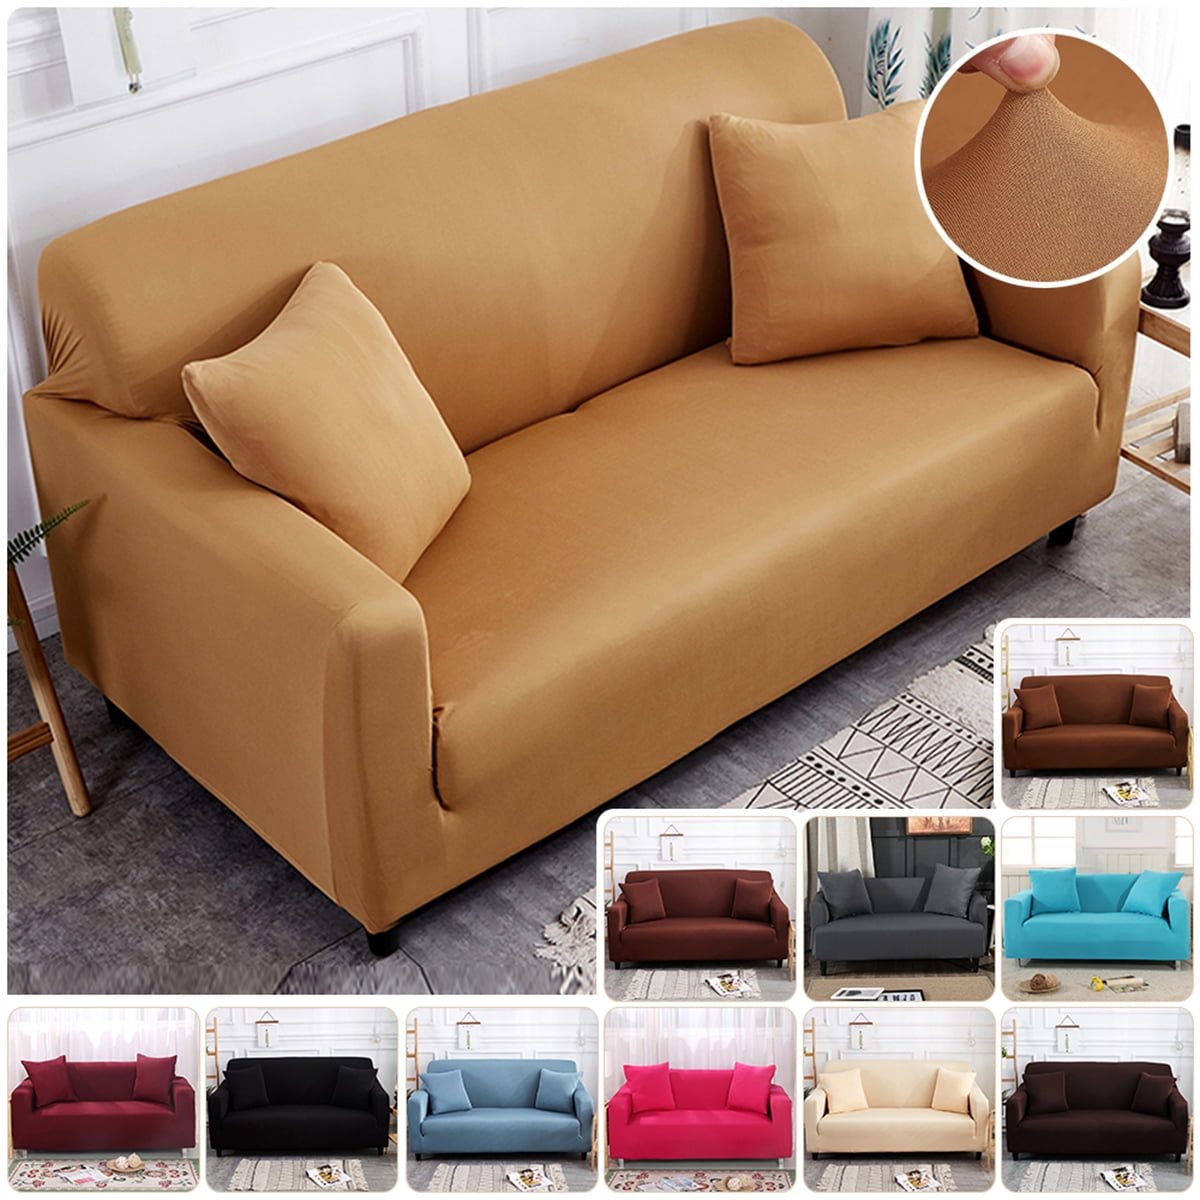 Stretch Recliner Slipcover Couch Soft Chair Covers Protector Washable Slipcover 